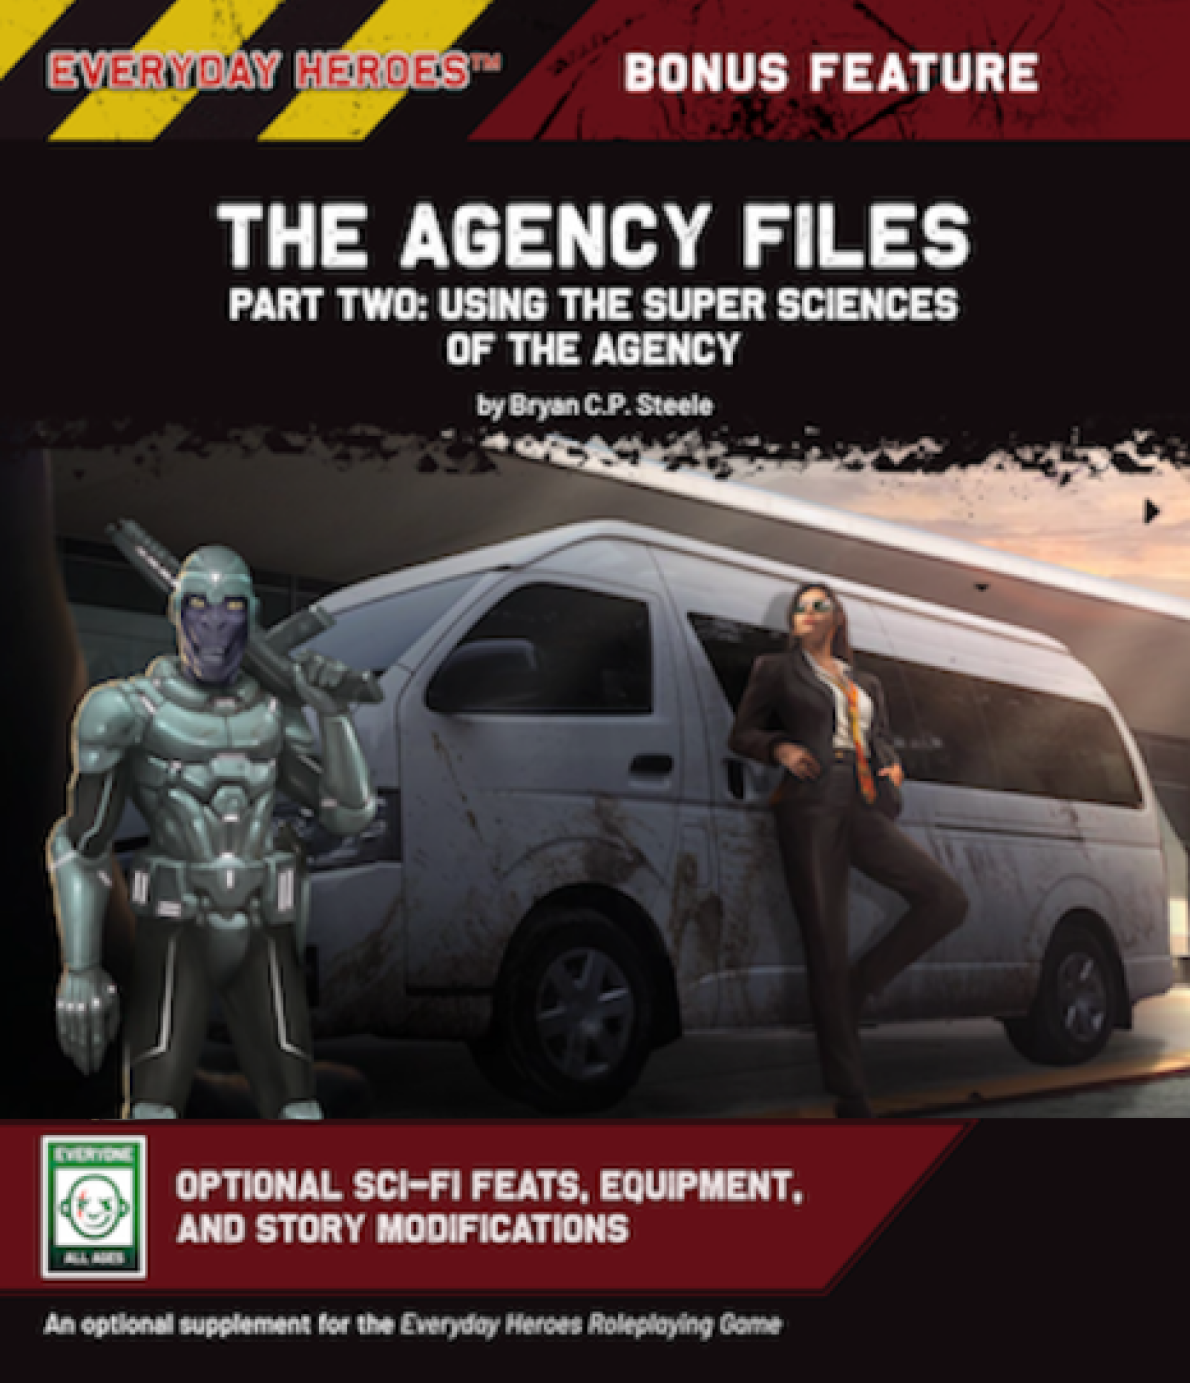 The Agency Files - Part Two: Using the Super Sciences of The Agency